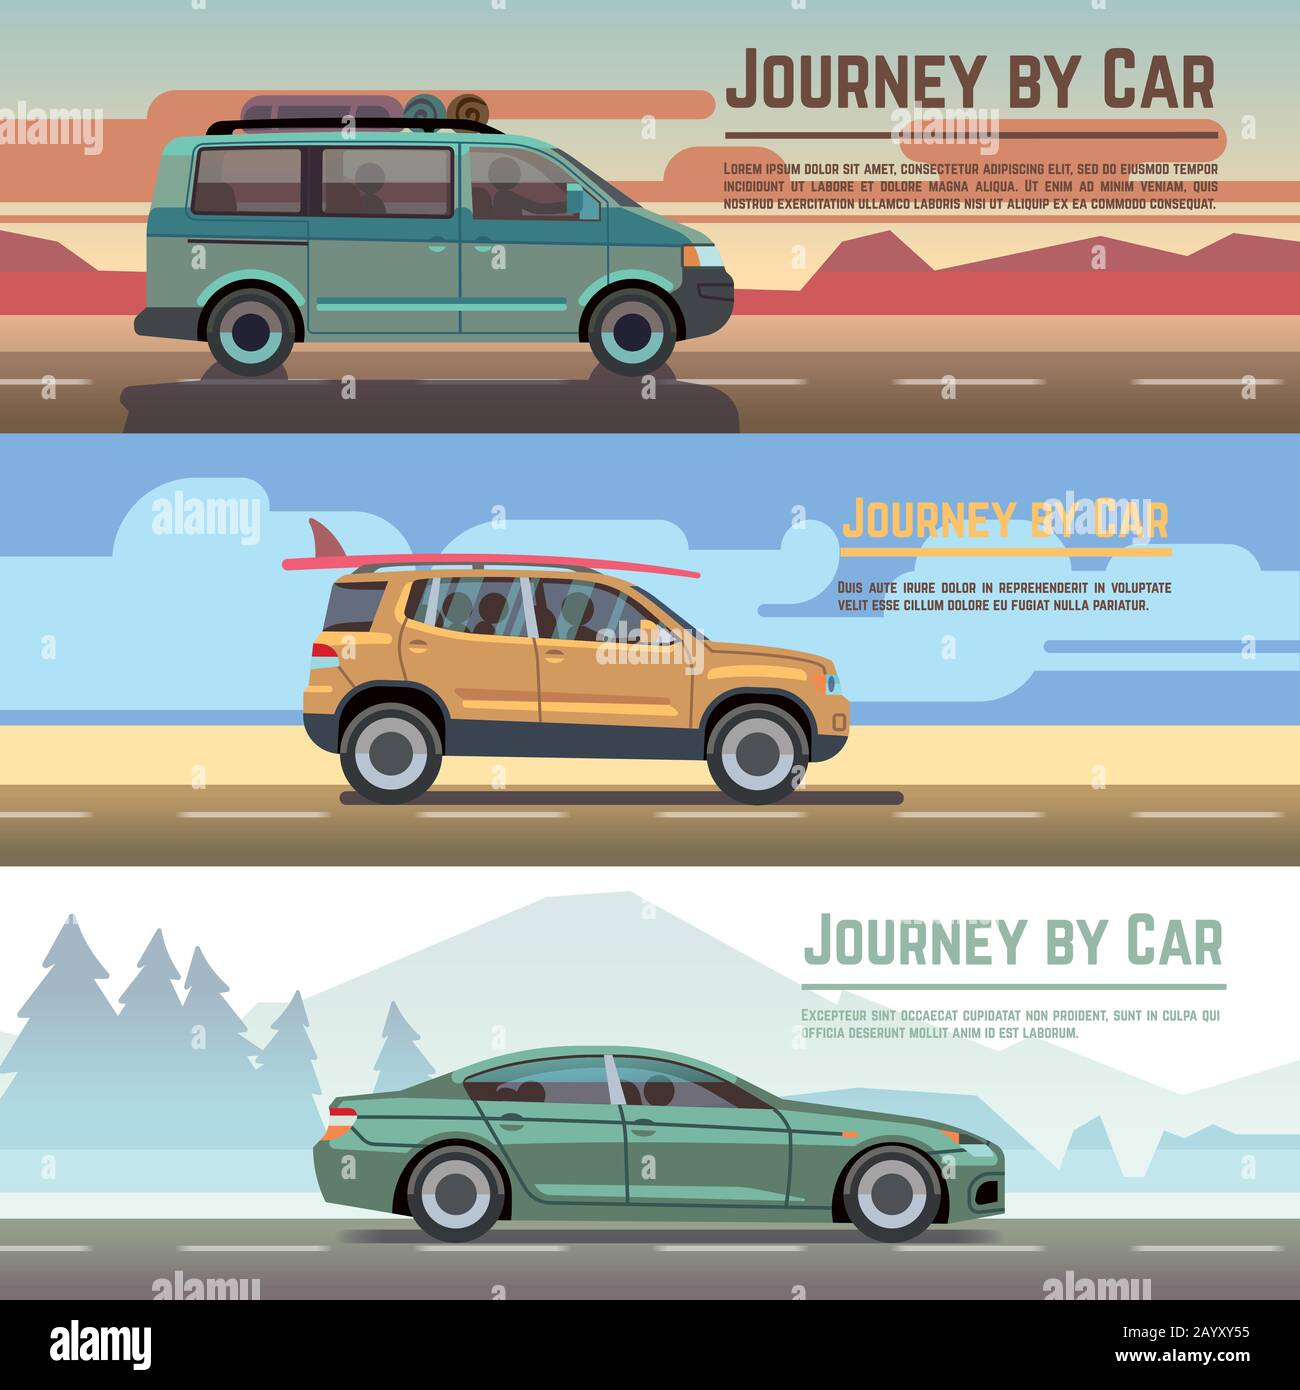 Trailering by car vector banners set. Car on road, auto holiday travel and car journey poster Stock Vector